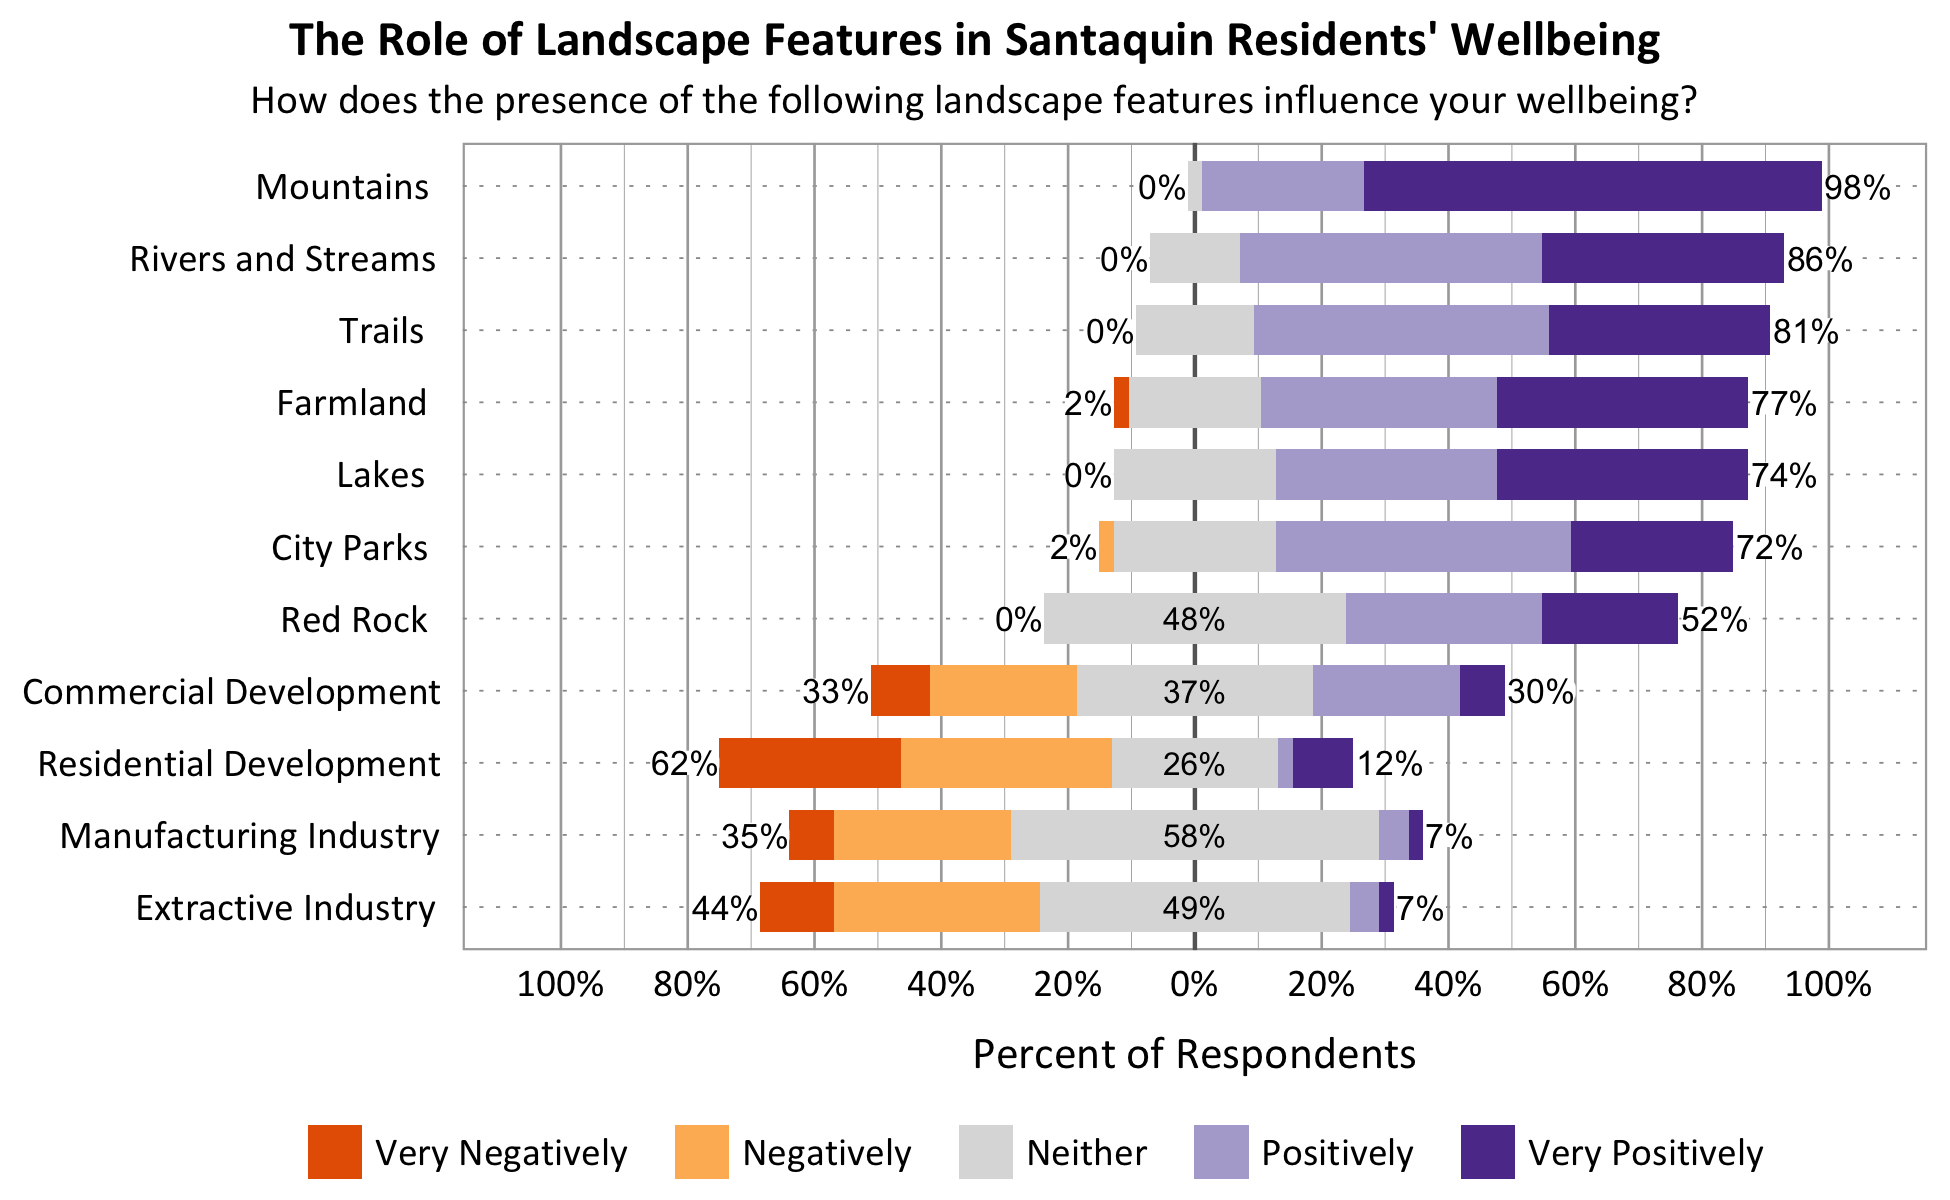 Likert Graph. Title: The Role of Landscape Features in Santaquin Residents' Wellbeing. Subtitle: How does the presence of the following landscape features influence your wellbeing? Feature: Mountains - 0% of respondents indicated very negatively or negatively, 2% indicated neither, 98% indicated positively or very positively; Feature: Rivers and Streams - 0% of respondents indicated very negatively or negatively, 14% indicated neither, 86% indicated positively or very positively; Feature: Lakes - 0% of respondents indicated very negatively or negatively, 26% indicated neither, 74% indicated positively or very positively; Feature: Trails - 0% of respondents indicated very negatively or negatively, 19% indicated neither, 81% indicated positively or very positively; Feature: Red Rock - 0% of respondents indicated very negatively or negatively, 48% indicated neither, 52% indicated positively or very positively; Feature: City Parks - 2% of respondents indicated very negatively or negatively, 26% indicated neither, 72% indicated positively or very positively; Feature: Farmland - 2% of respondents indicated very negatively or negatively, 21% indicated neither, 77% indicated positively or very positively; Feature: Residential Development - 62% of respondents indicated very negatively or negatively, 26% indicated neither, 12% indicated positively or very positively; Feature: Commercial Development - 33% of respondents indicated very negatively or negatively, 37% indicated neither, 30% indicated positively or very positively; Feature: Extractive Industry - 44% of respondents indicated very negatively or negatively, 49% indicated neither, 7% indicated positively or very positively; Feature: Manufacturing Industry - 35% of respondents indicated very negatively or negatively, 58% indicated neither, 7% indicated positively or very positively.